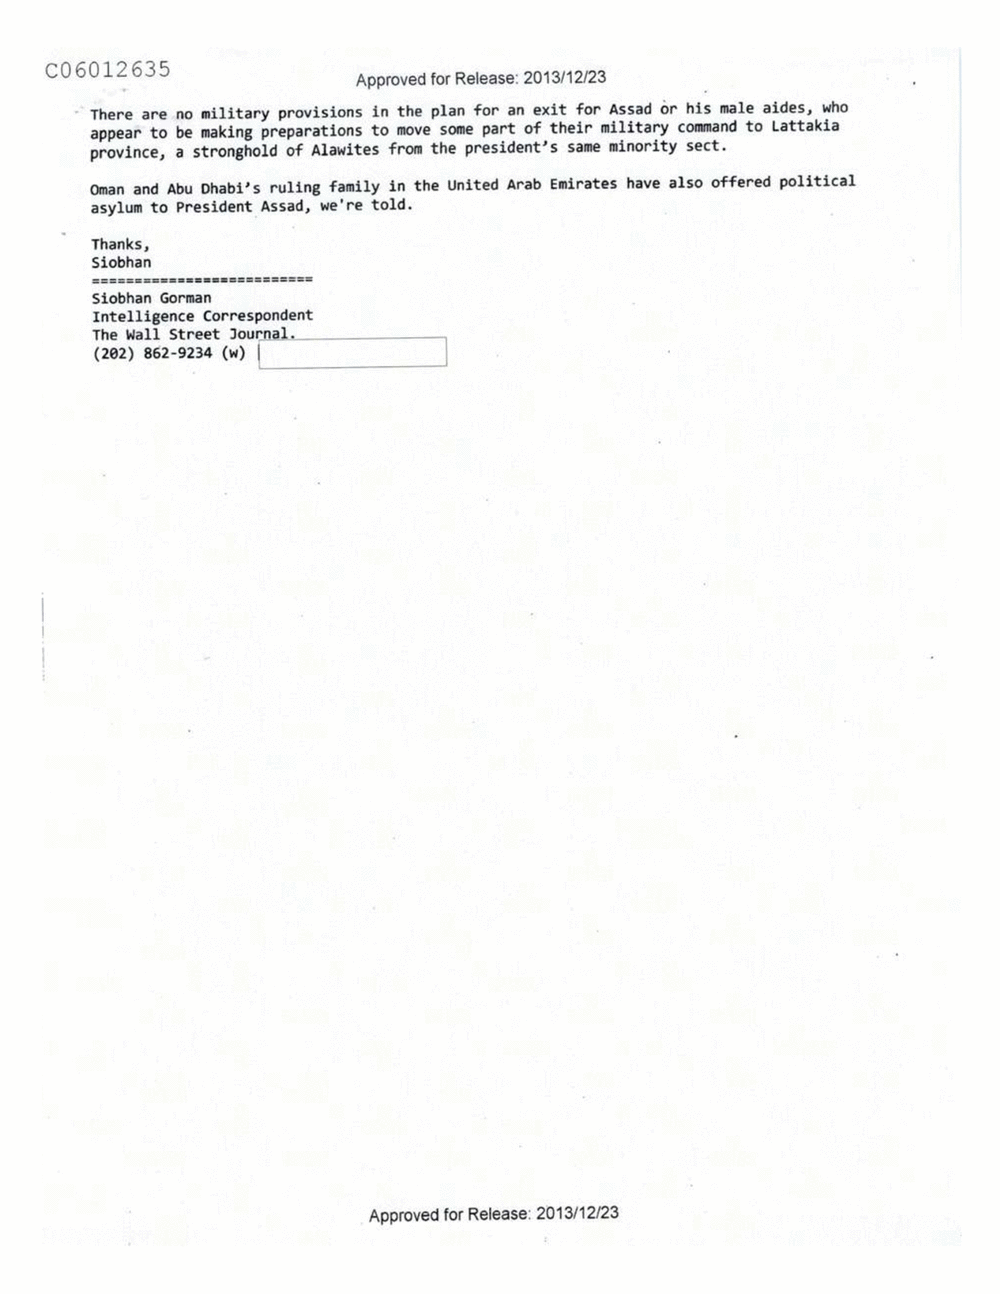 Page 199 from Email Correspondence Between Reporters and CIA Flacks